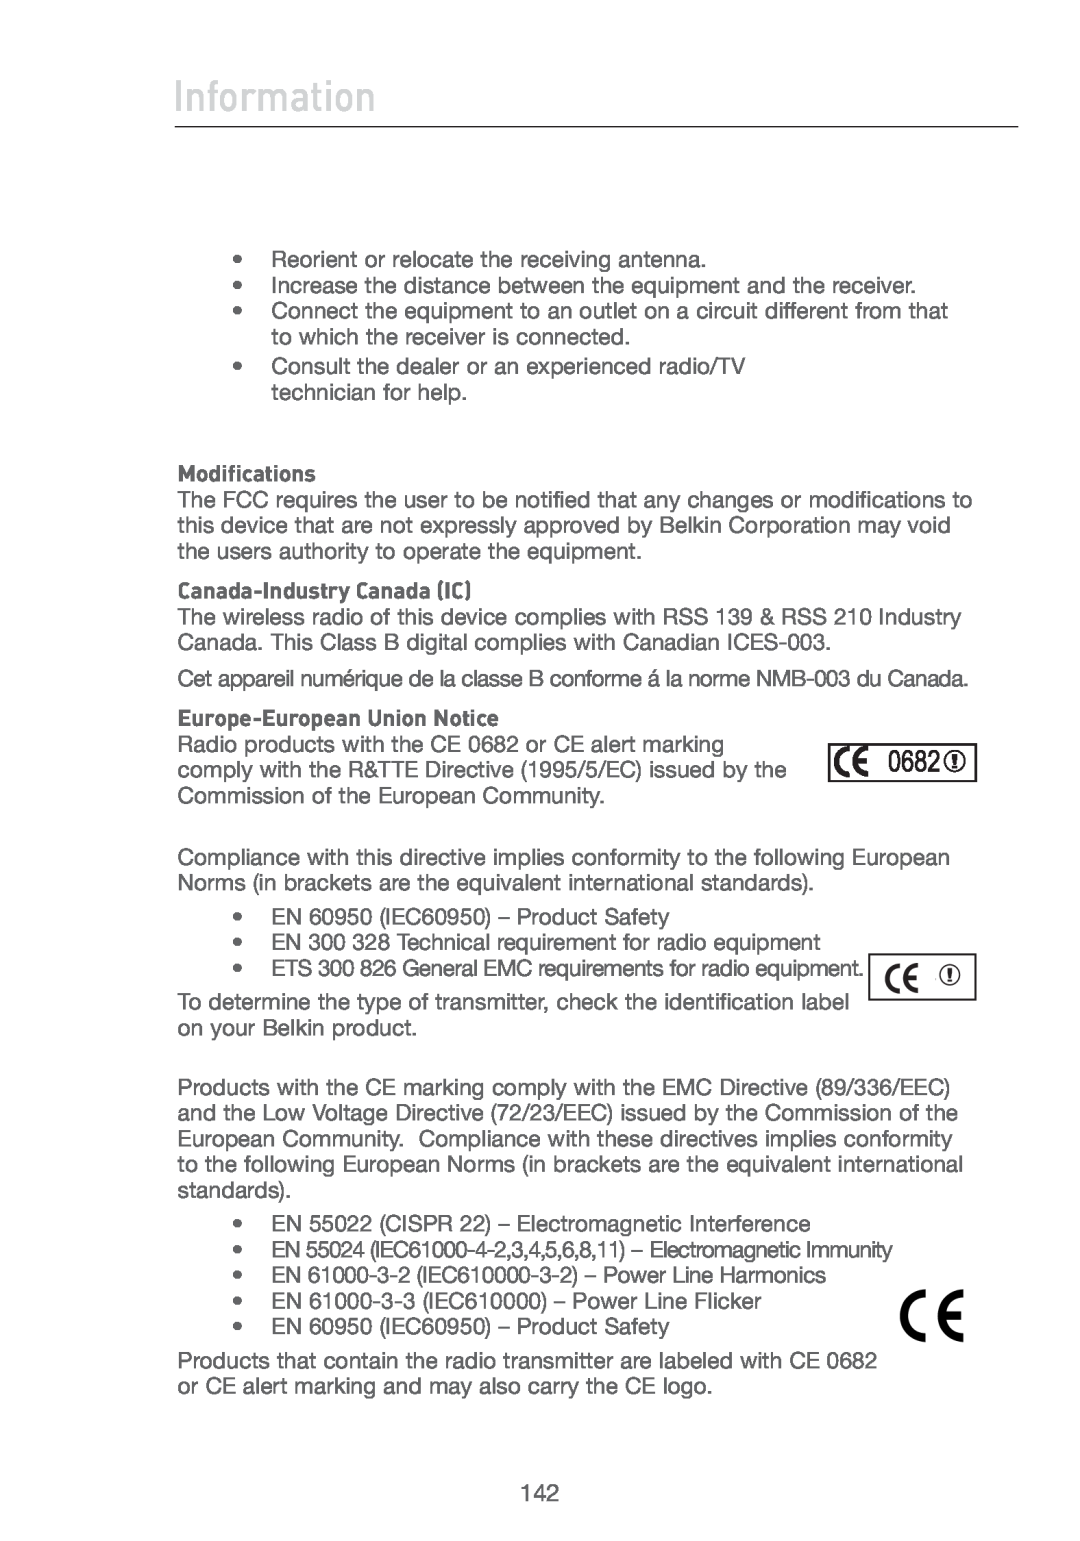 Belkin F5D7231-4P user manual Information, Modifications, Canada-Industry Canada IC, Europe-European Union Notice 